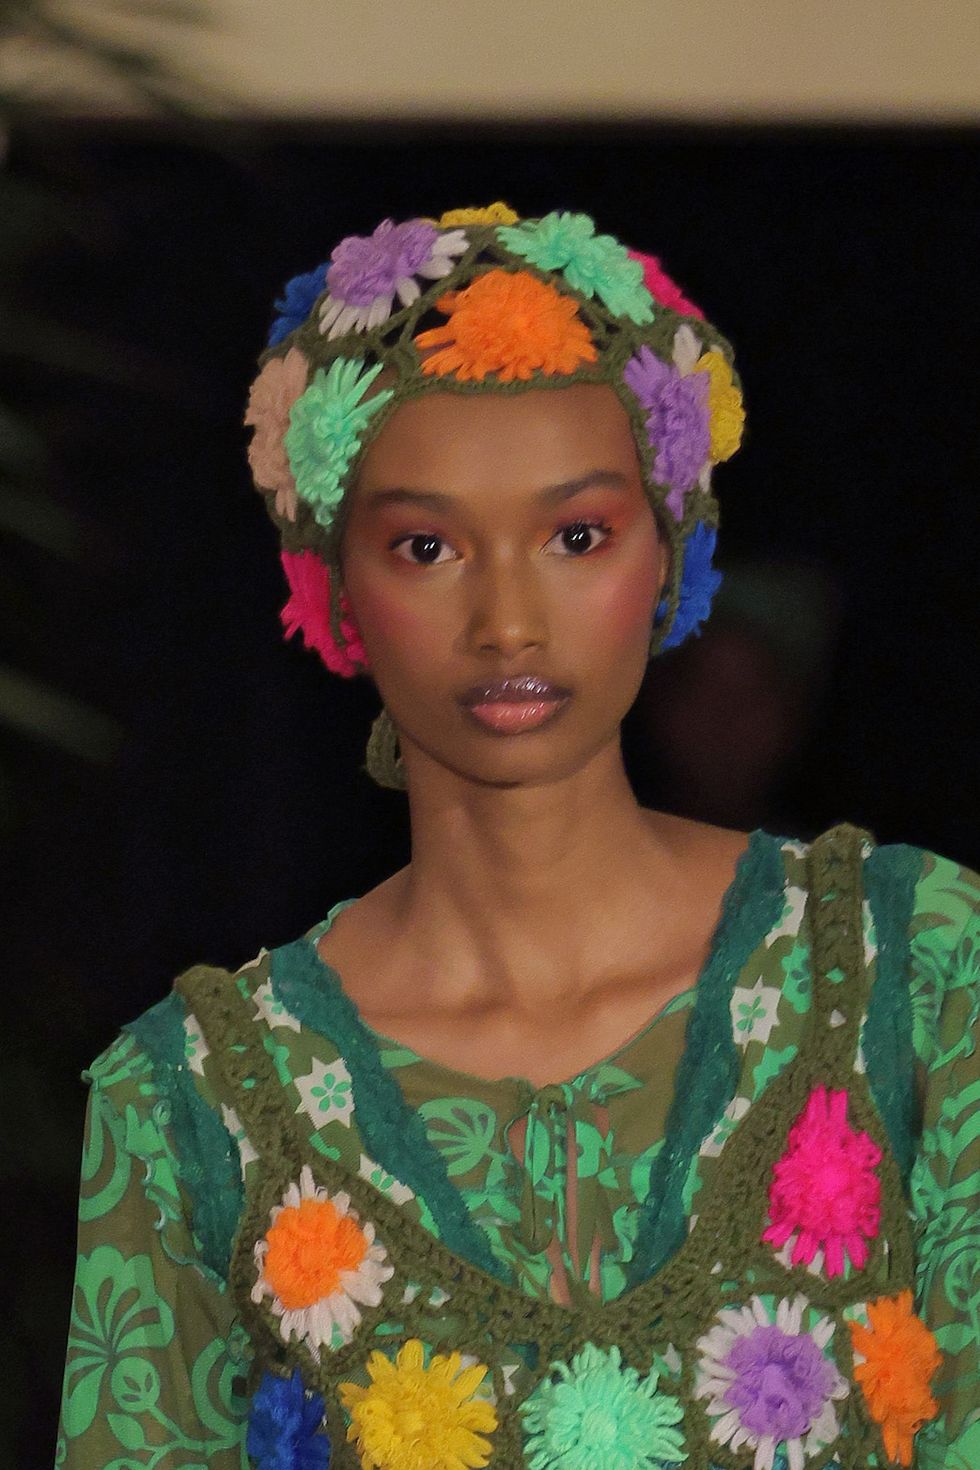 Spring 2022 Bag Trends Straight From the Runways